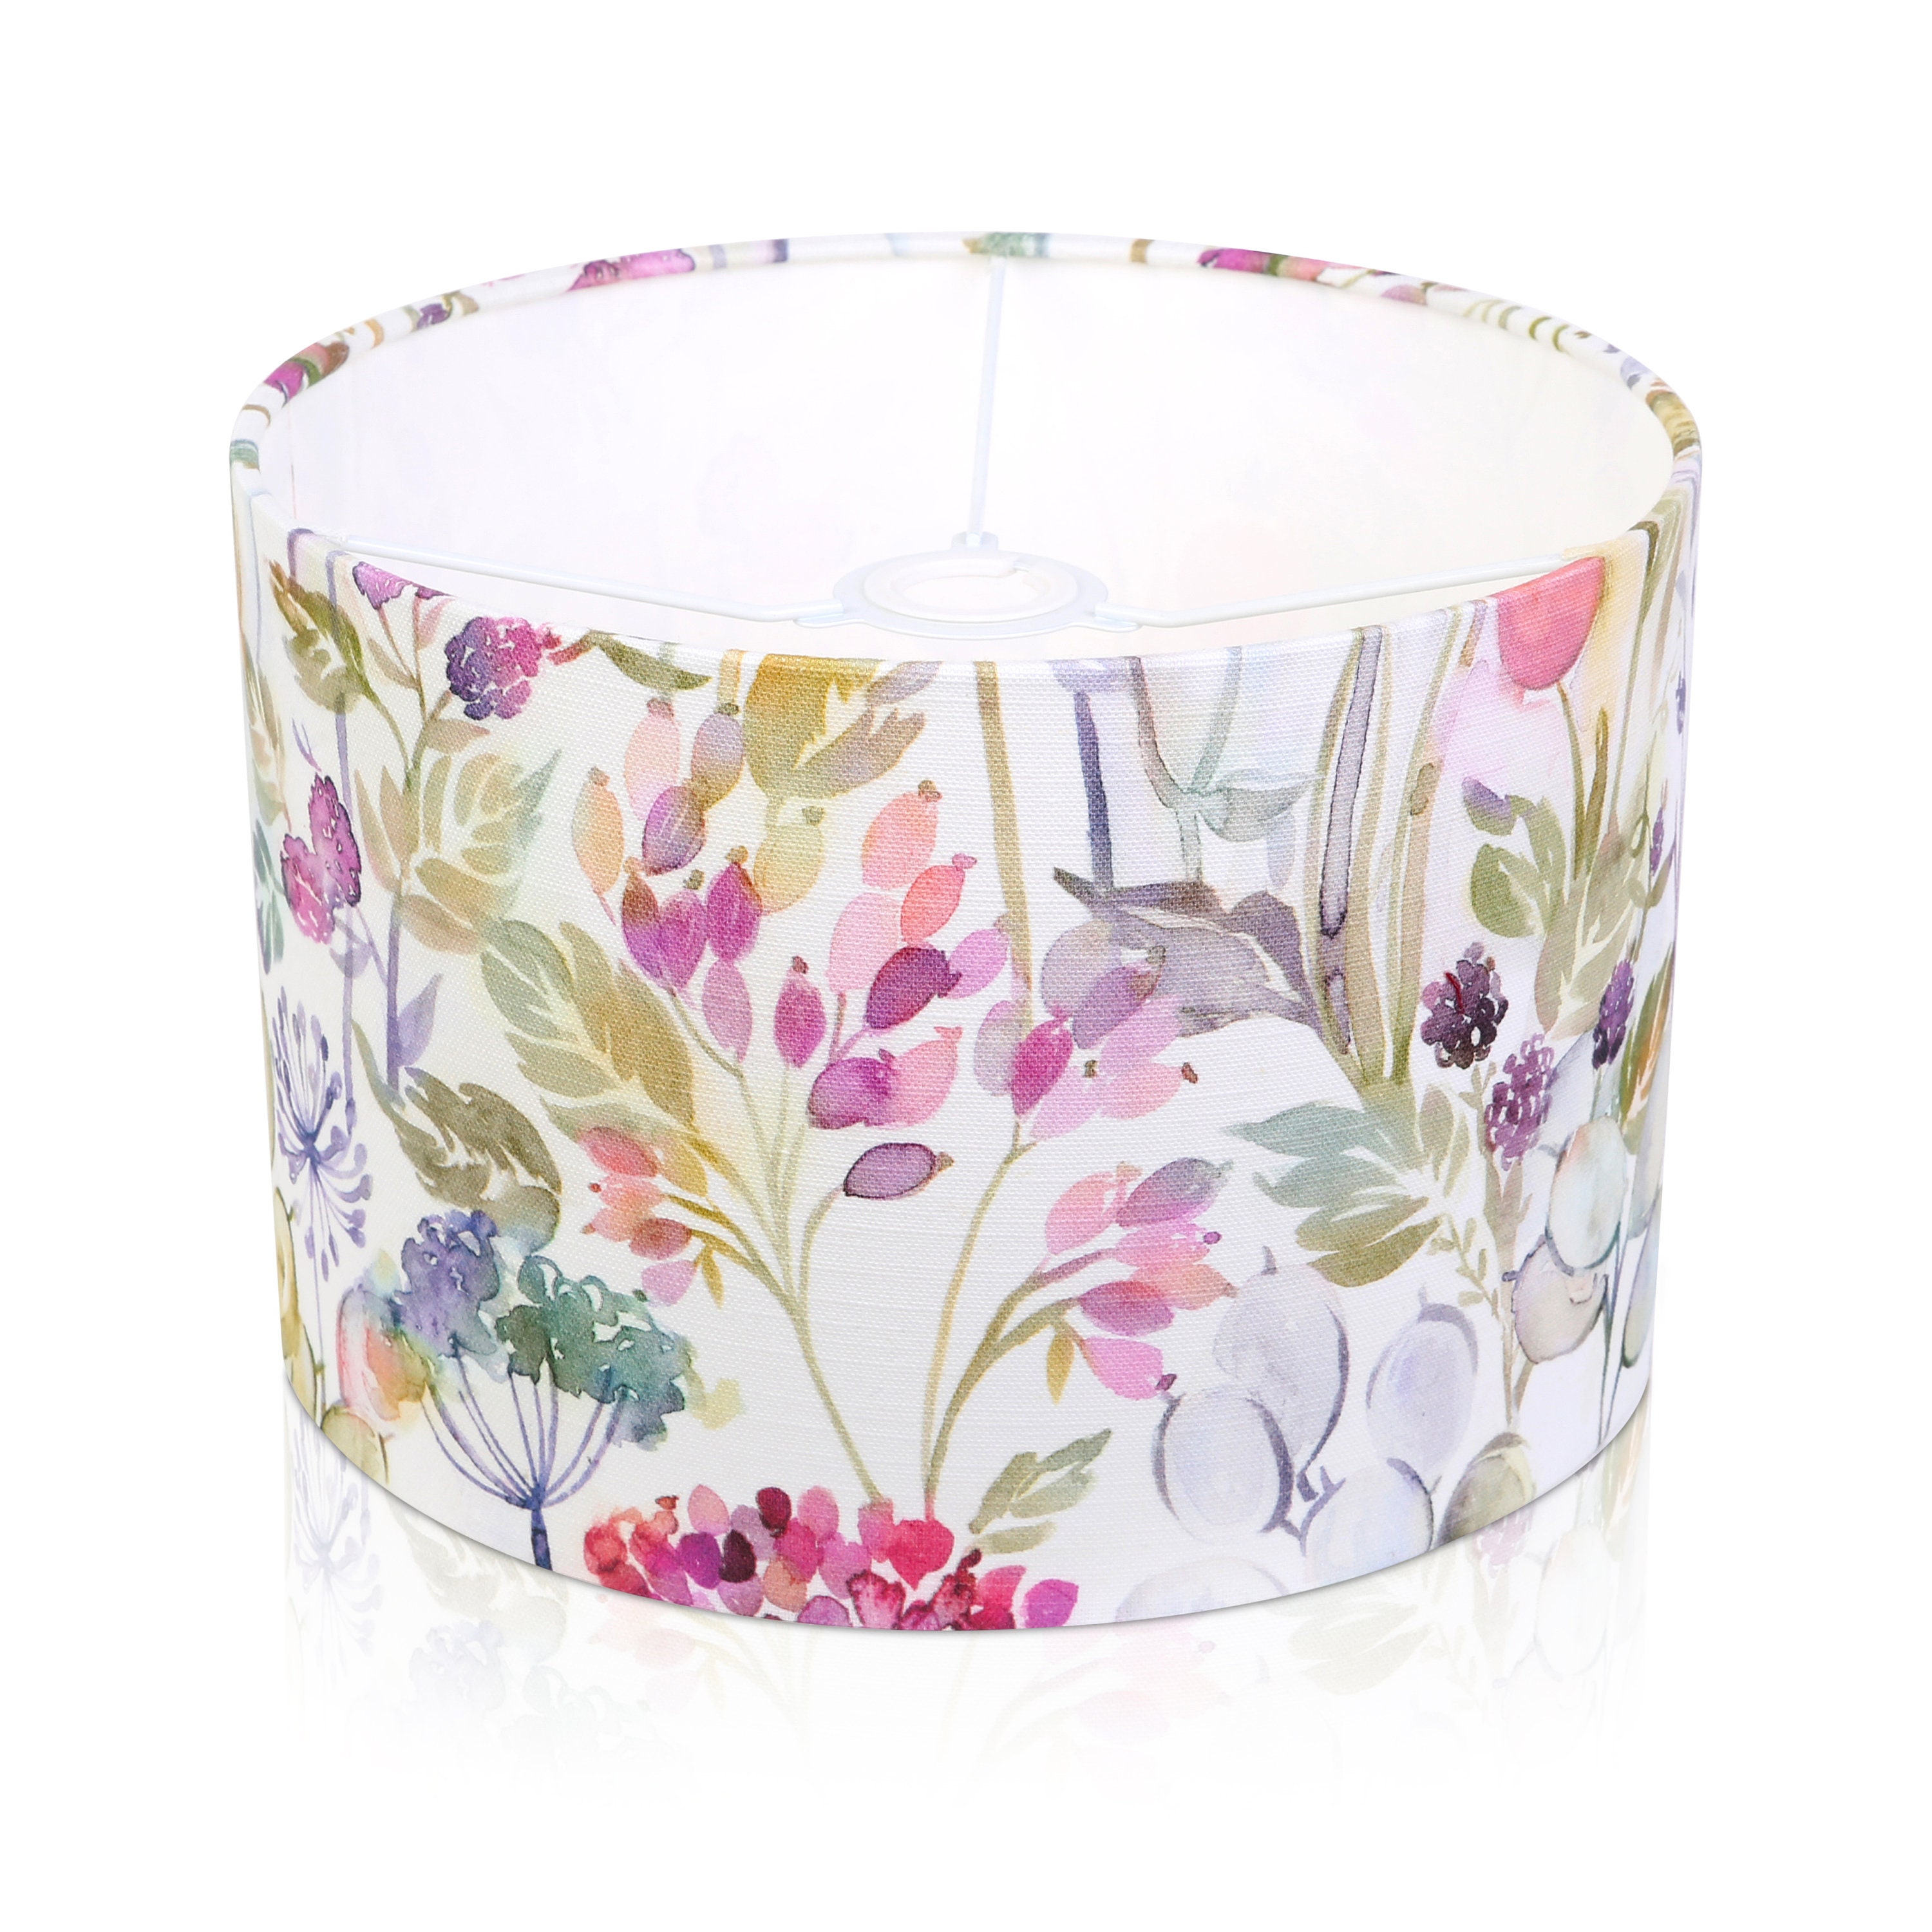 Voyage HEDGEROW linen pink country floral drum lampshade 15 20 25 30 35 40cm 